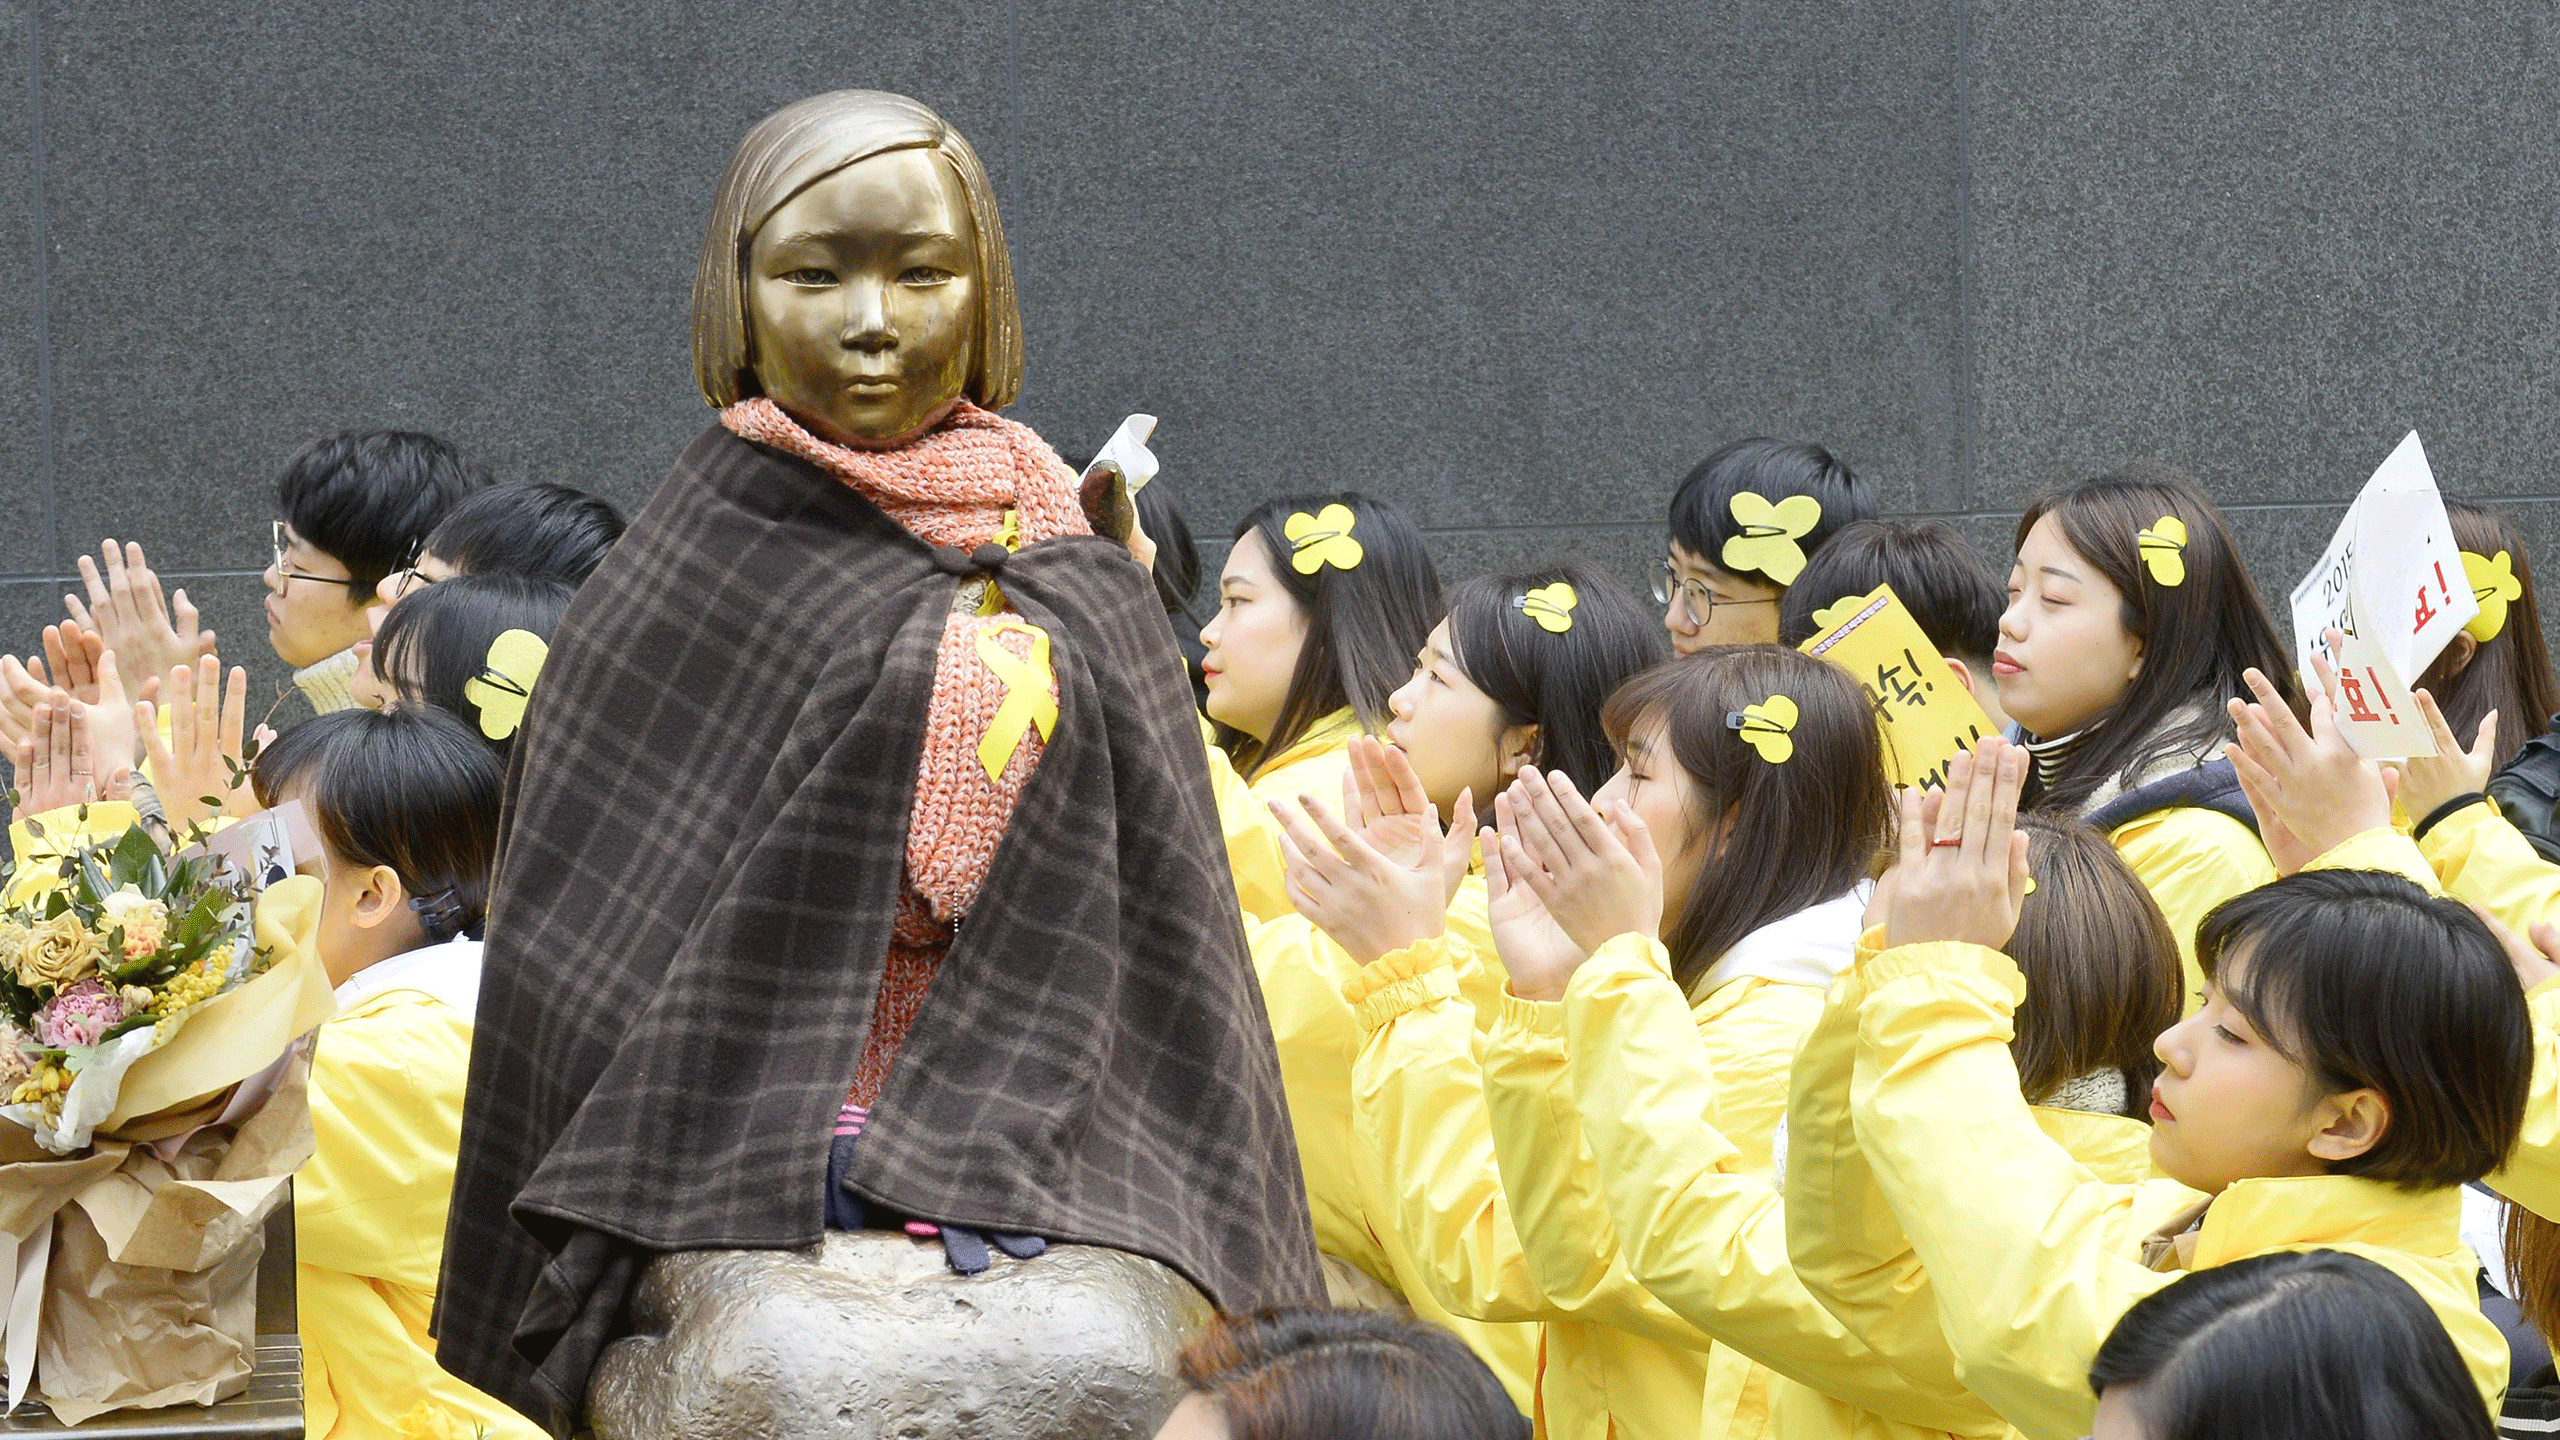 Demonstrators gather in March 2017 around a statue representing former "comfort women" installed in front of the Japanese Embassy in Seoul, to protest against a move to remove it. Photo: Kyodo.